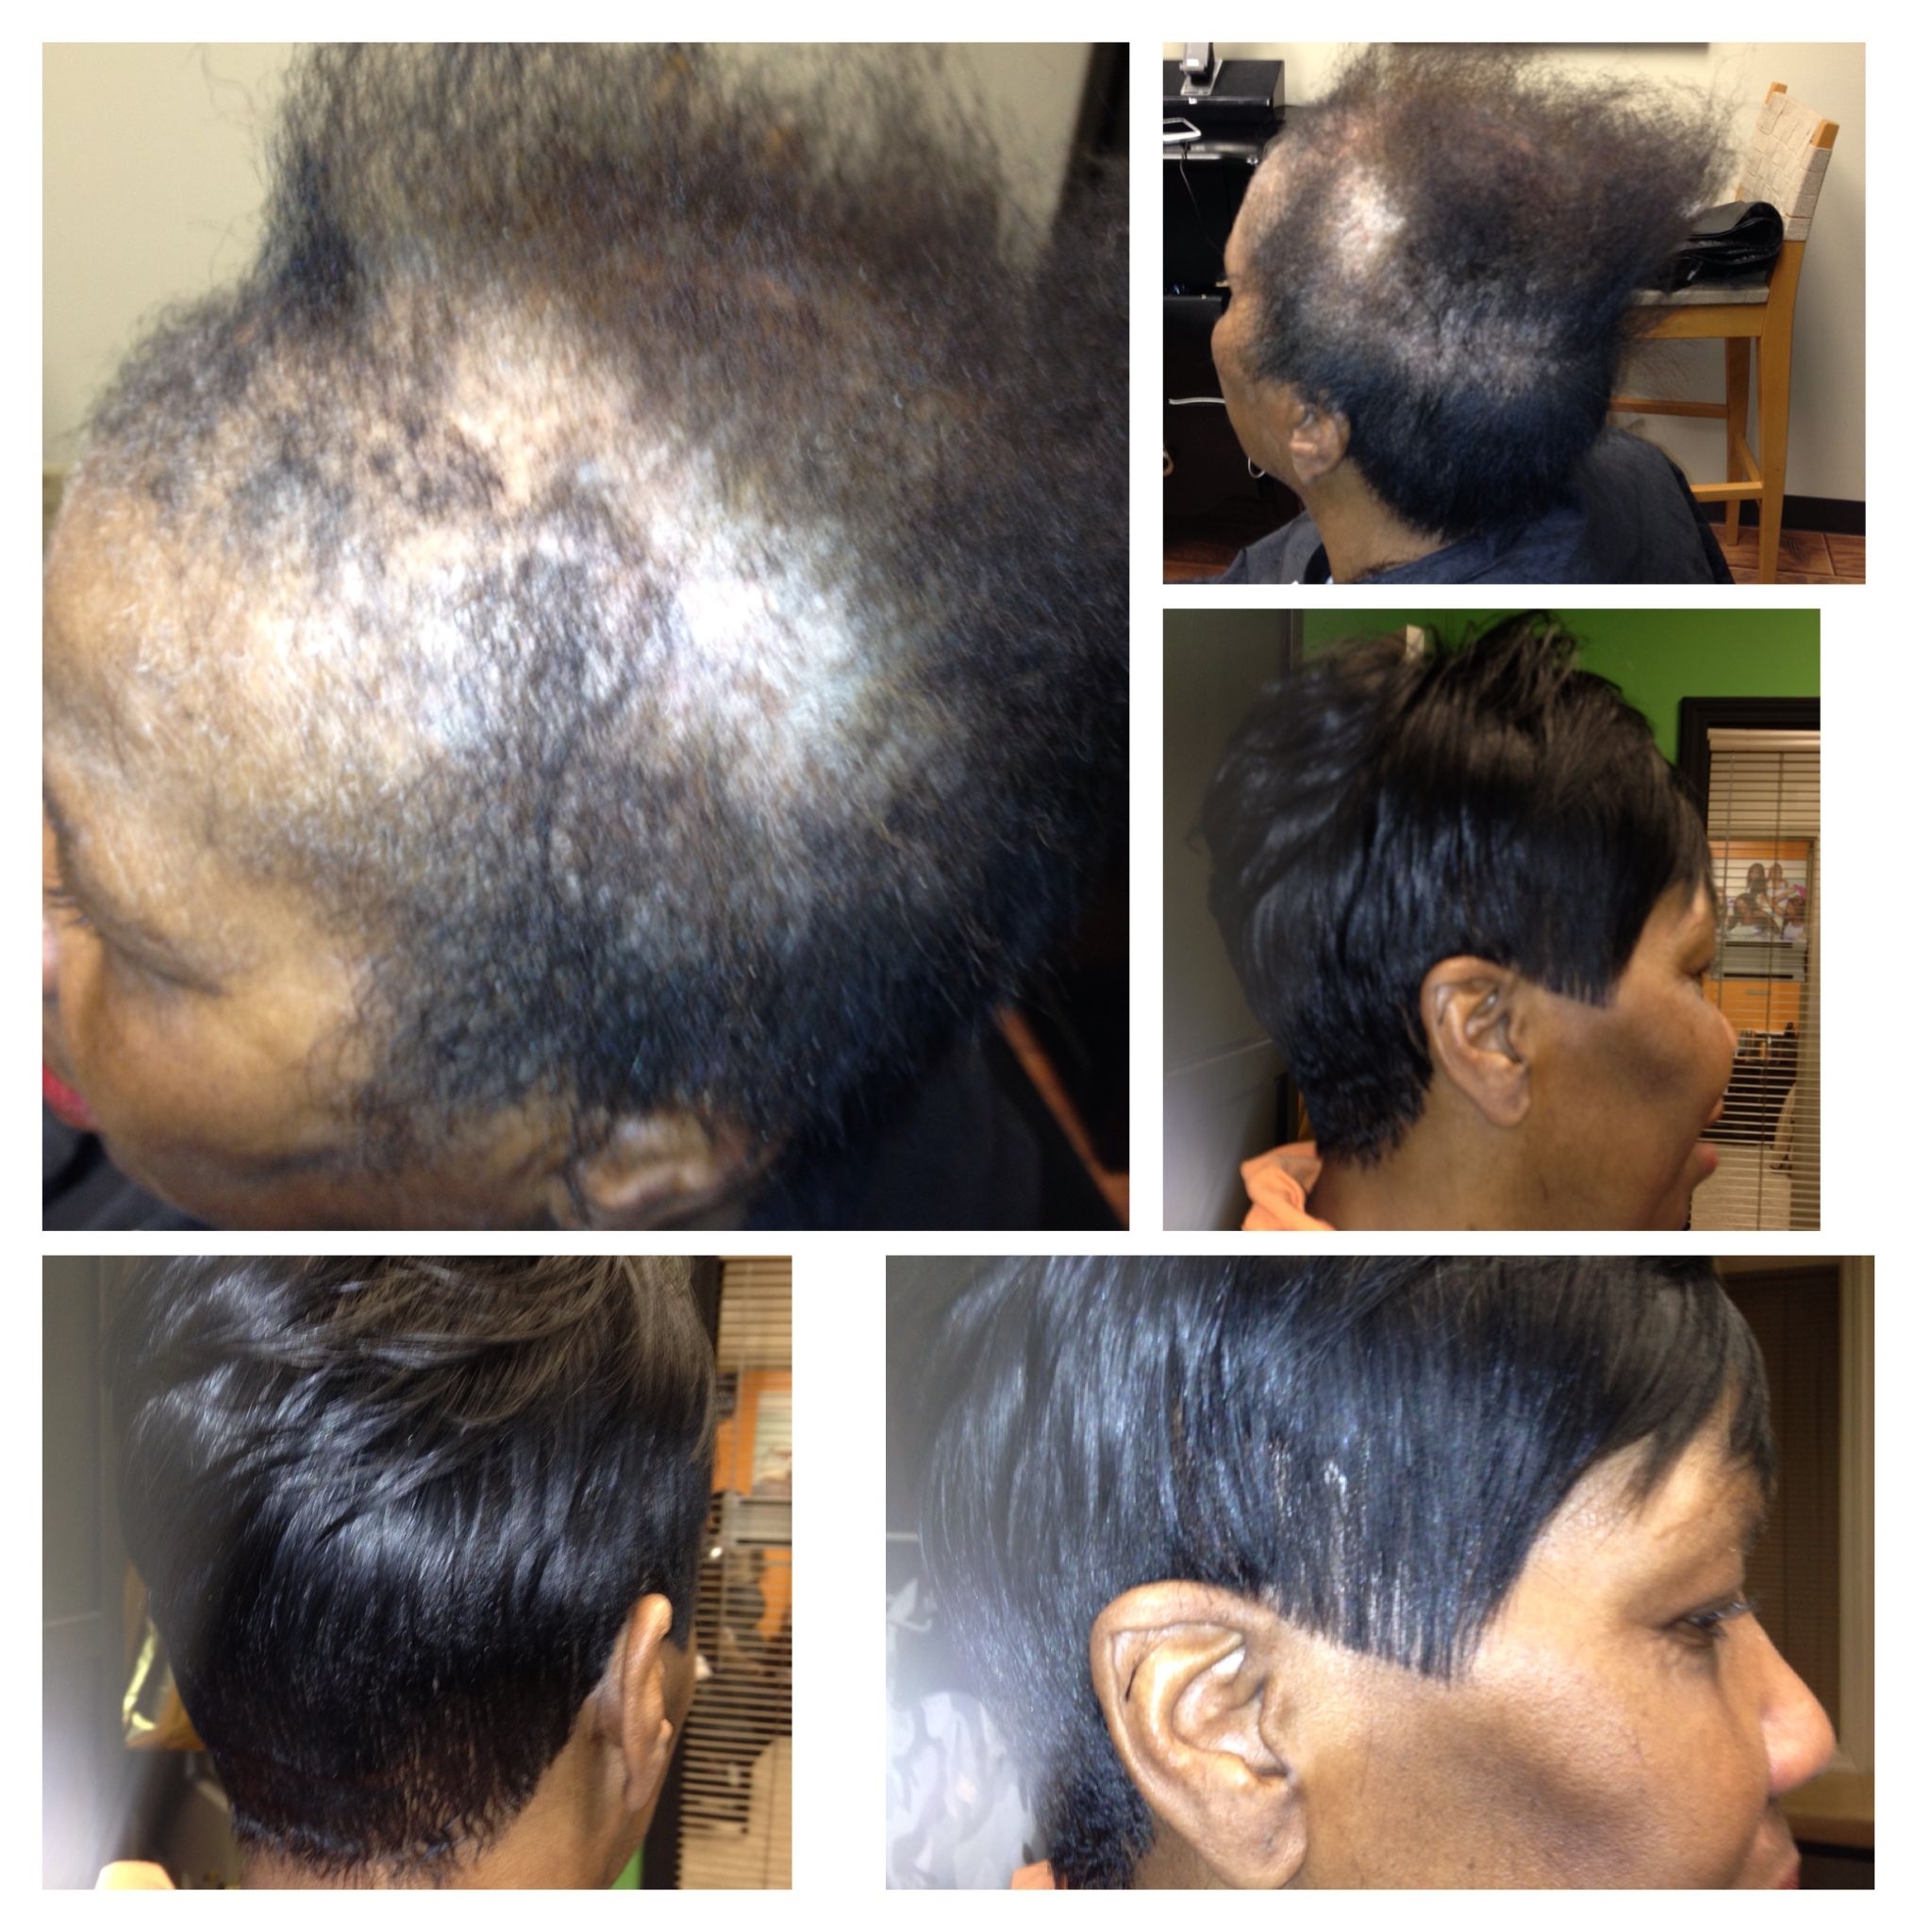 Full Custom Sewin 'no Glue' Natural Looking Sewin Thinning throughout Black Hairstyles With Hair Loss